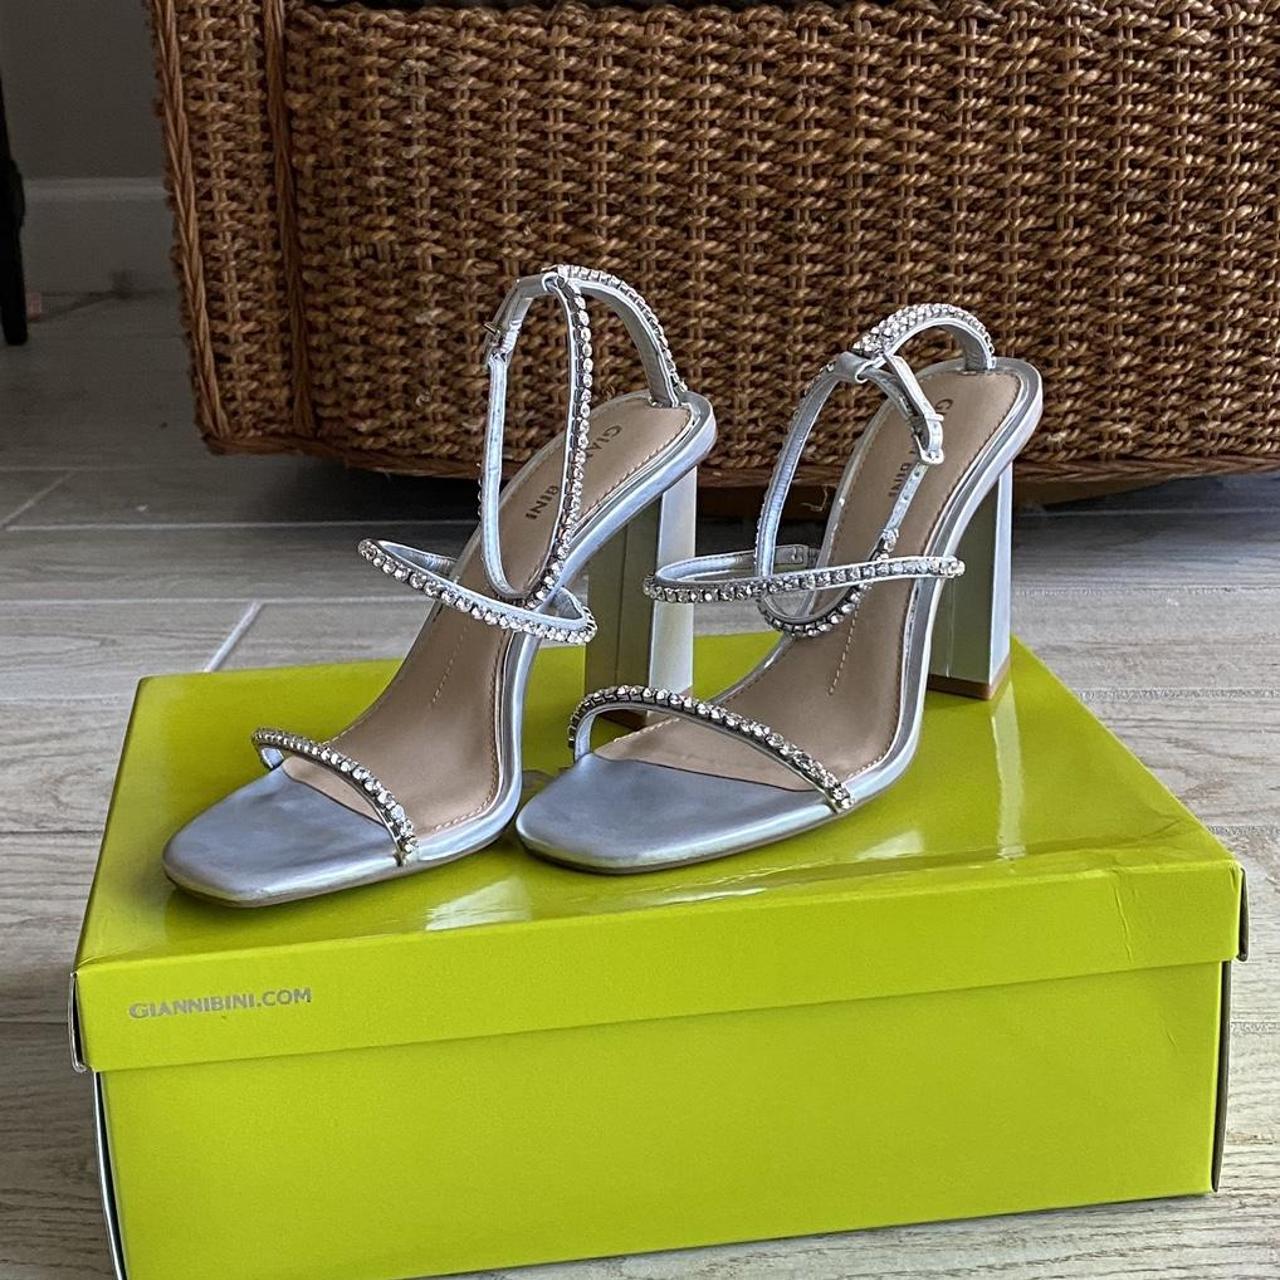 Women's Silver and Grey Sandals | Depop